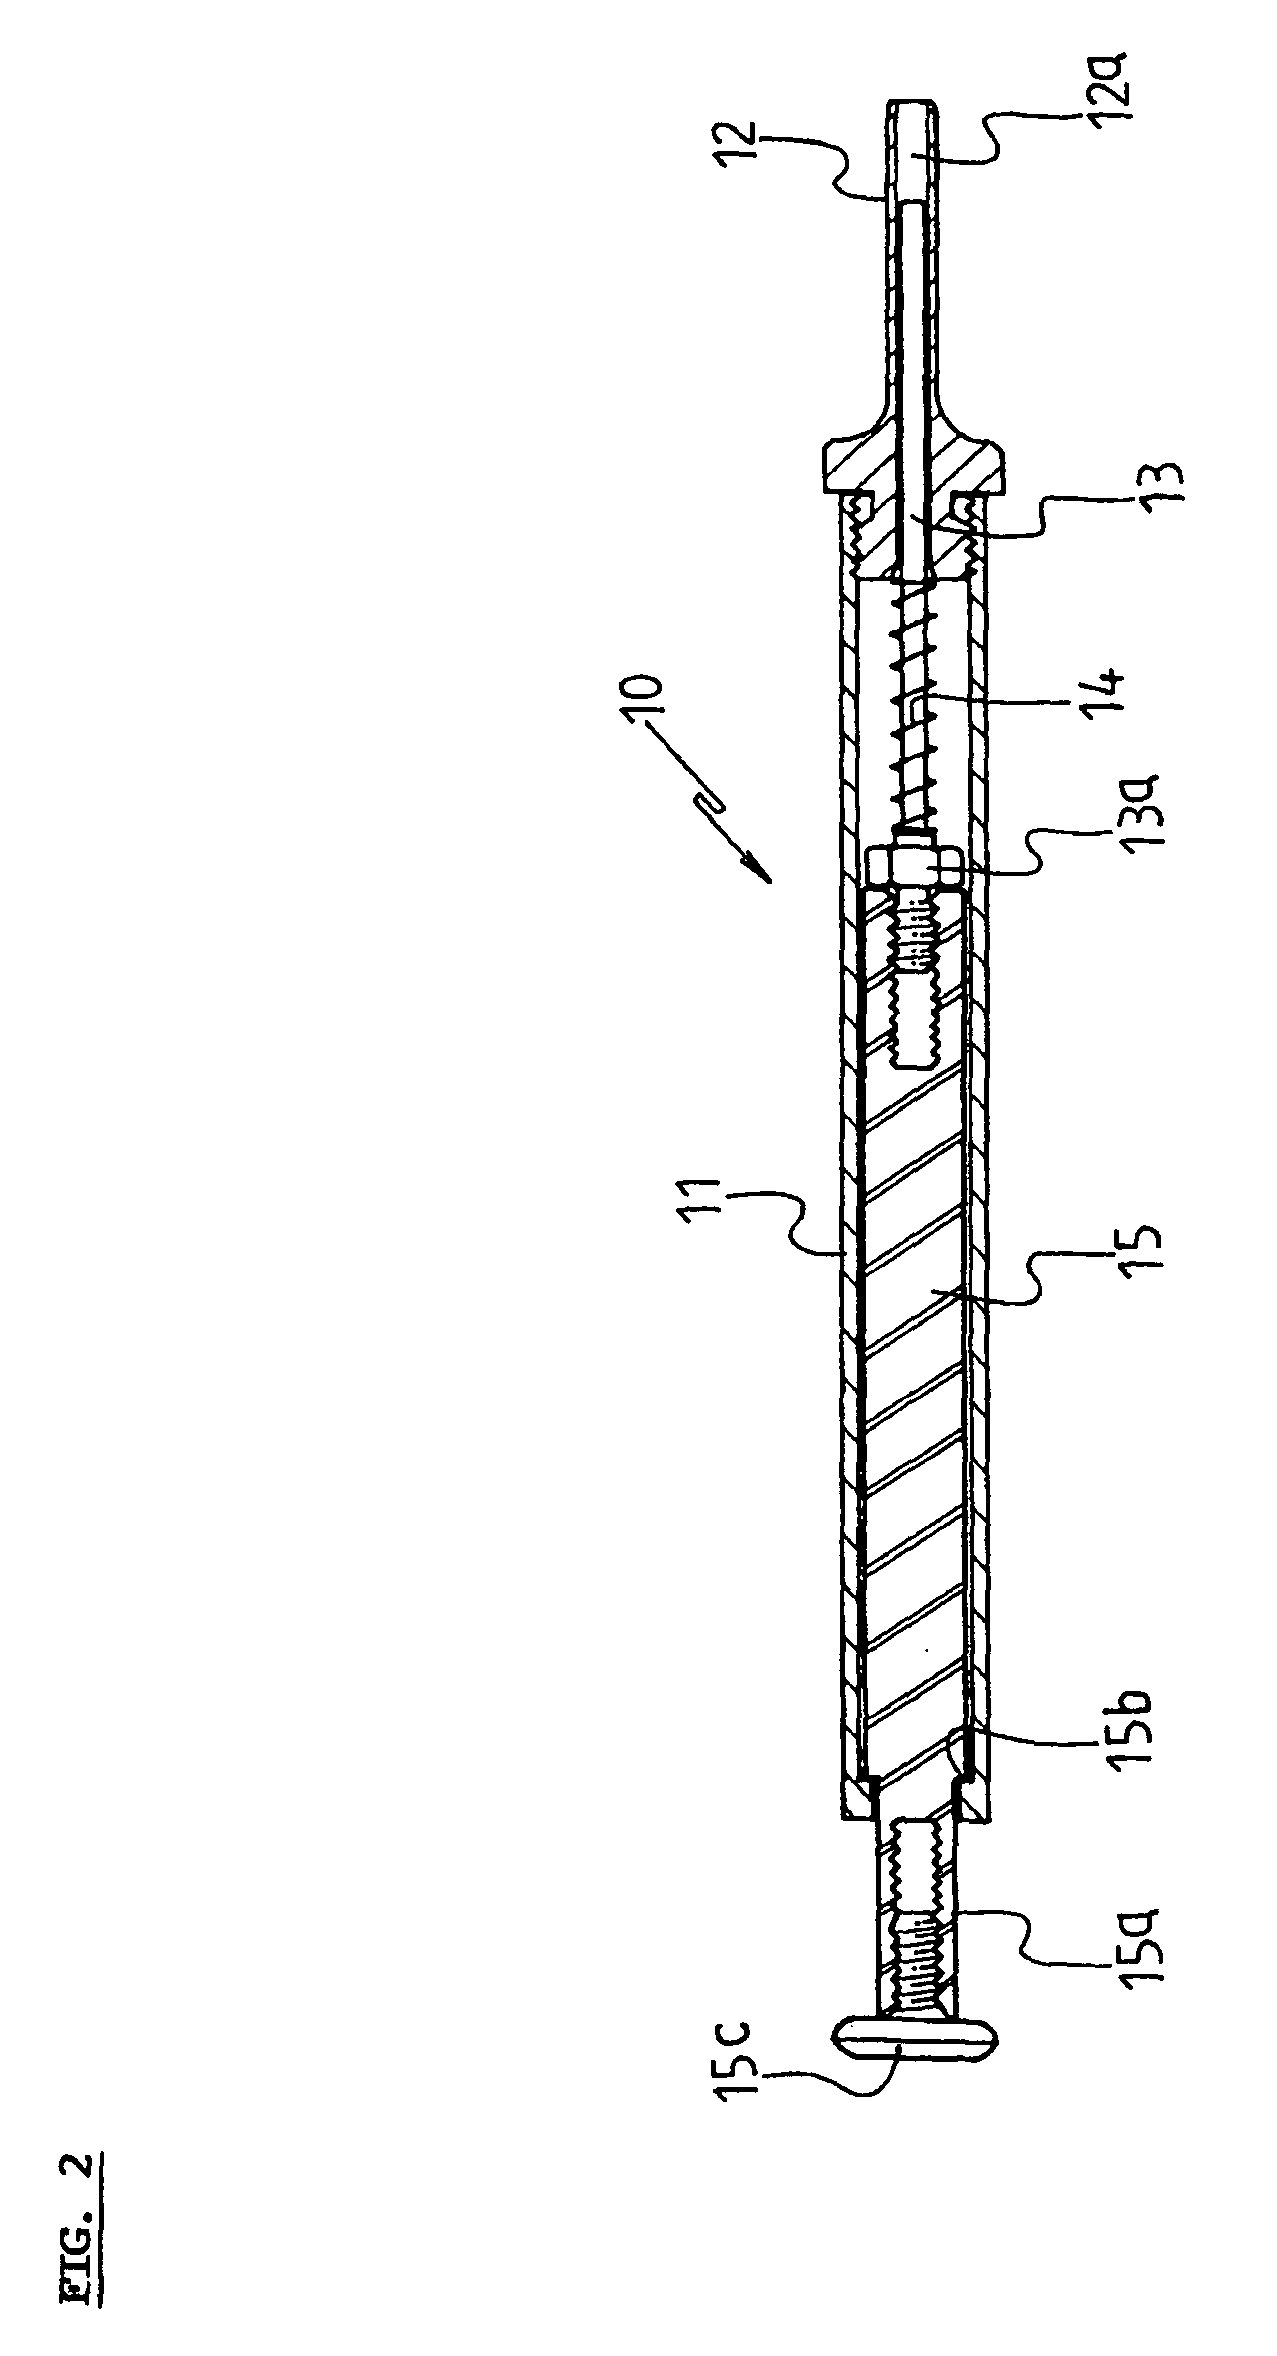 Human tissue inspection device